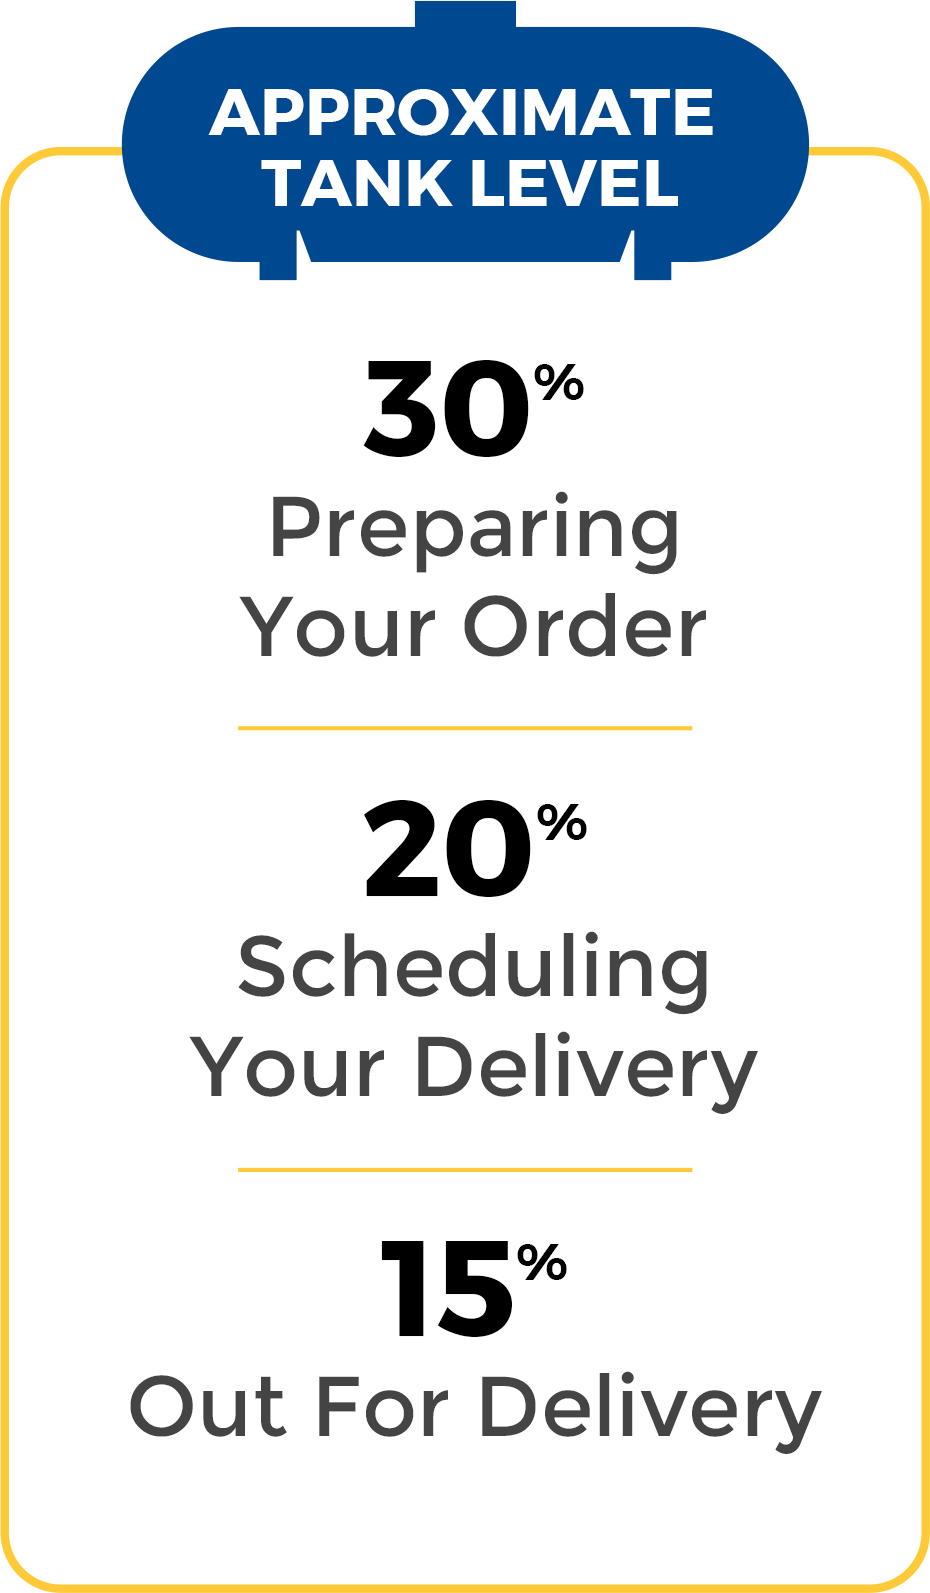 An infographic explaining our delivery process when tank levels reach 30%, 20% and 15%.